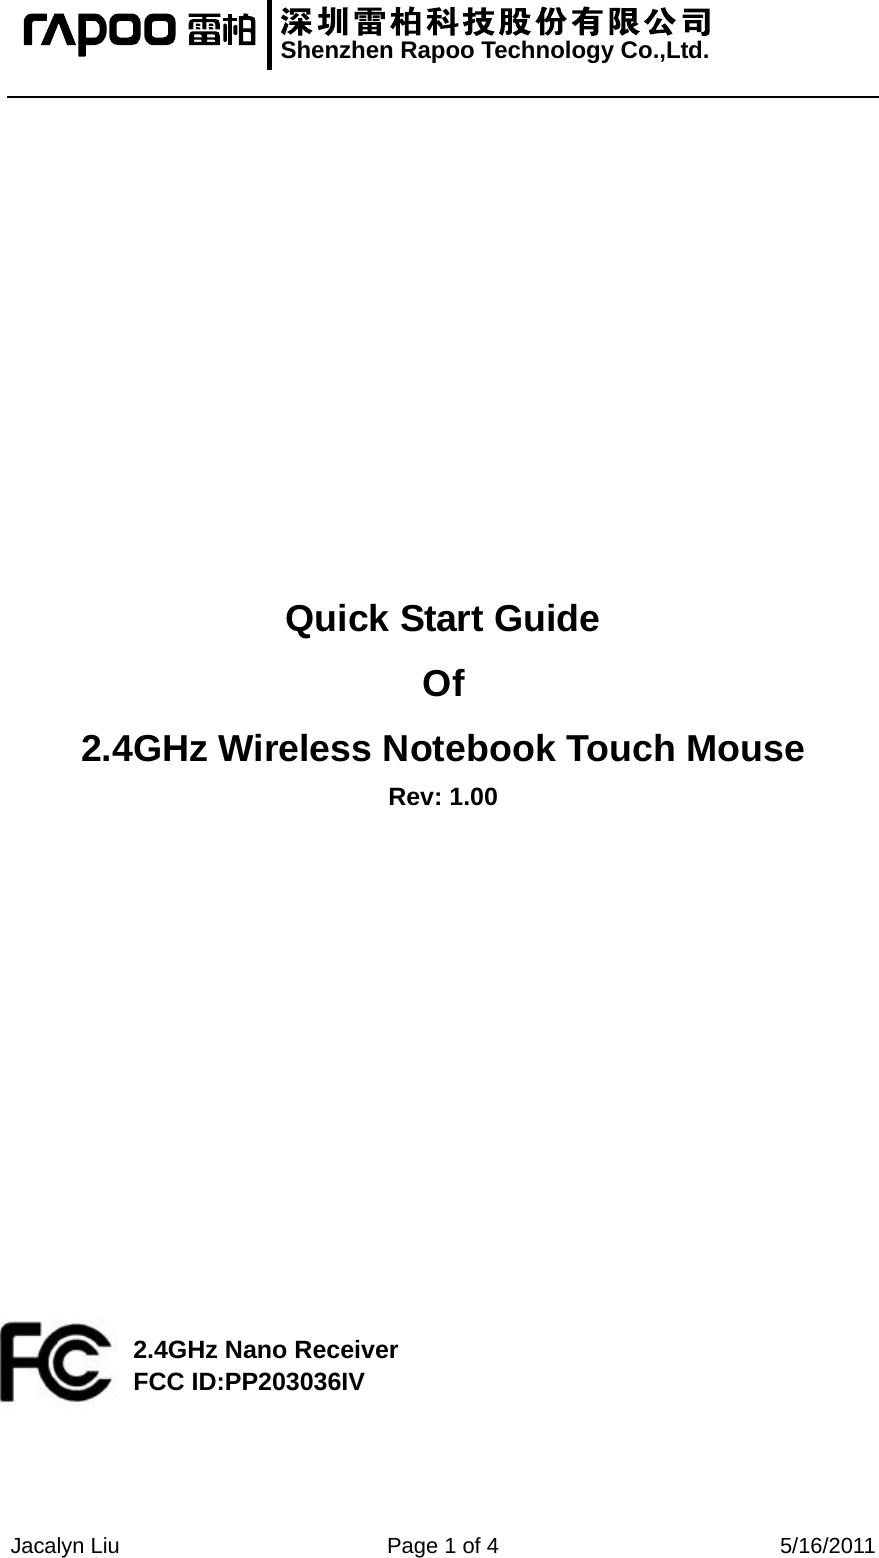   Shenzhen Rapoo Technology Co.,Ltd.  Jacalyn Liu  Page 1 of 4  5/16/2011                          Quick Start Guide Of 2.4GHz Wireless Notebook Touch Mouse Rev: 1.00                 2.4GHz Nano Receiver FCC ID:PP203036IV    